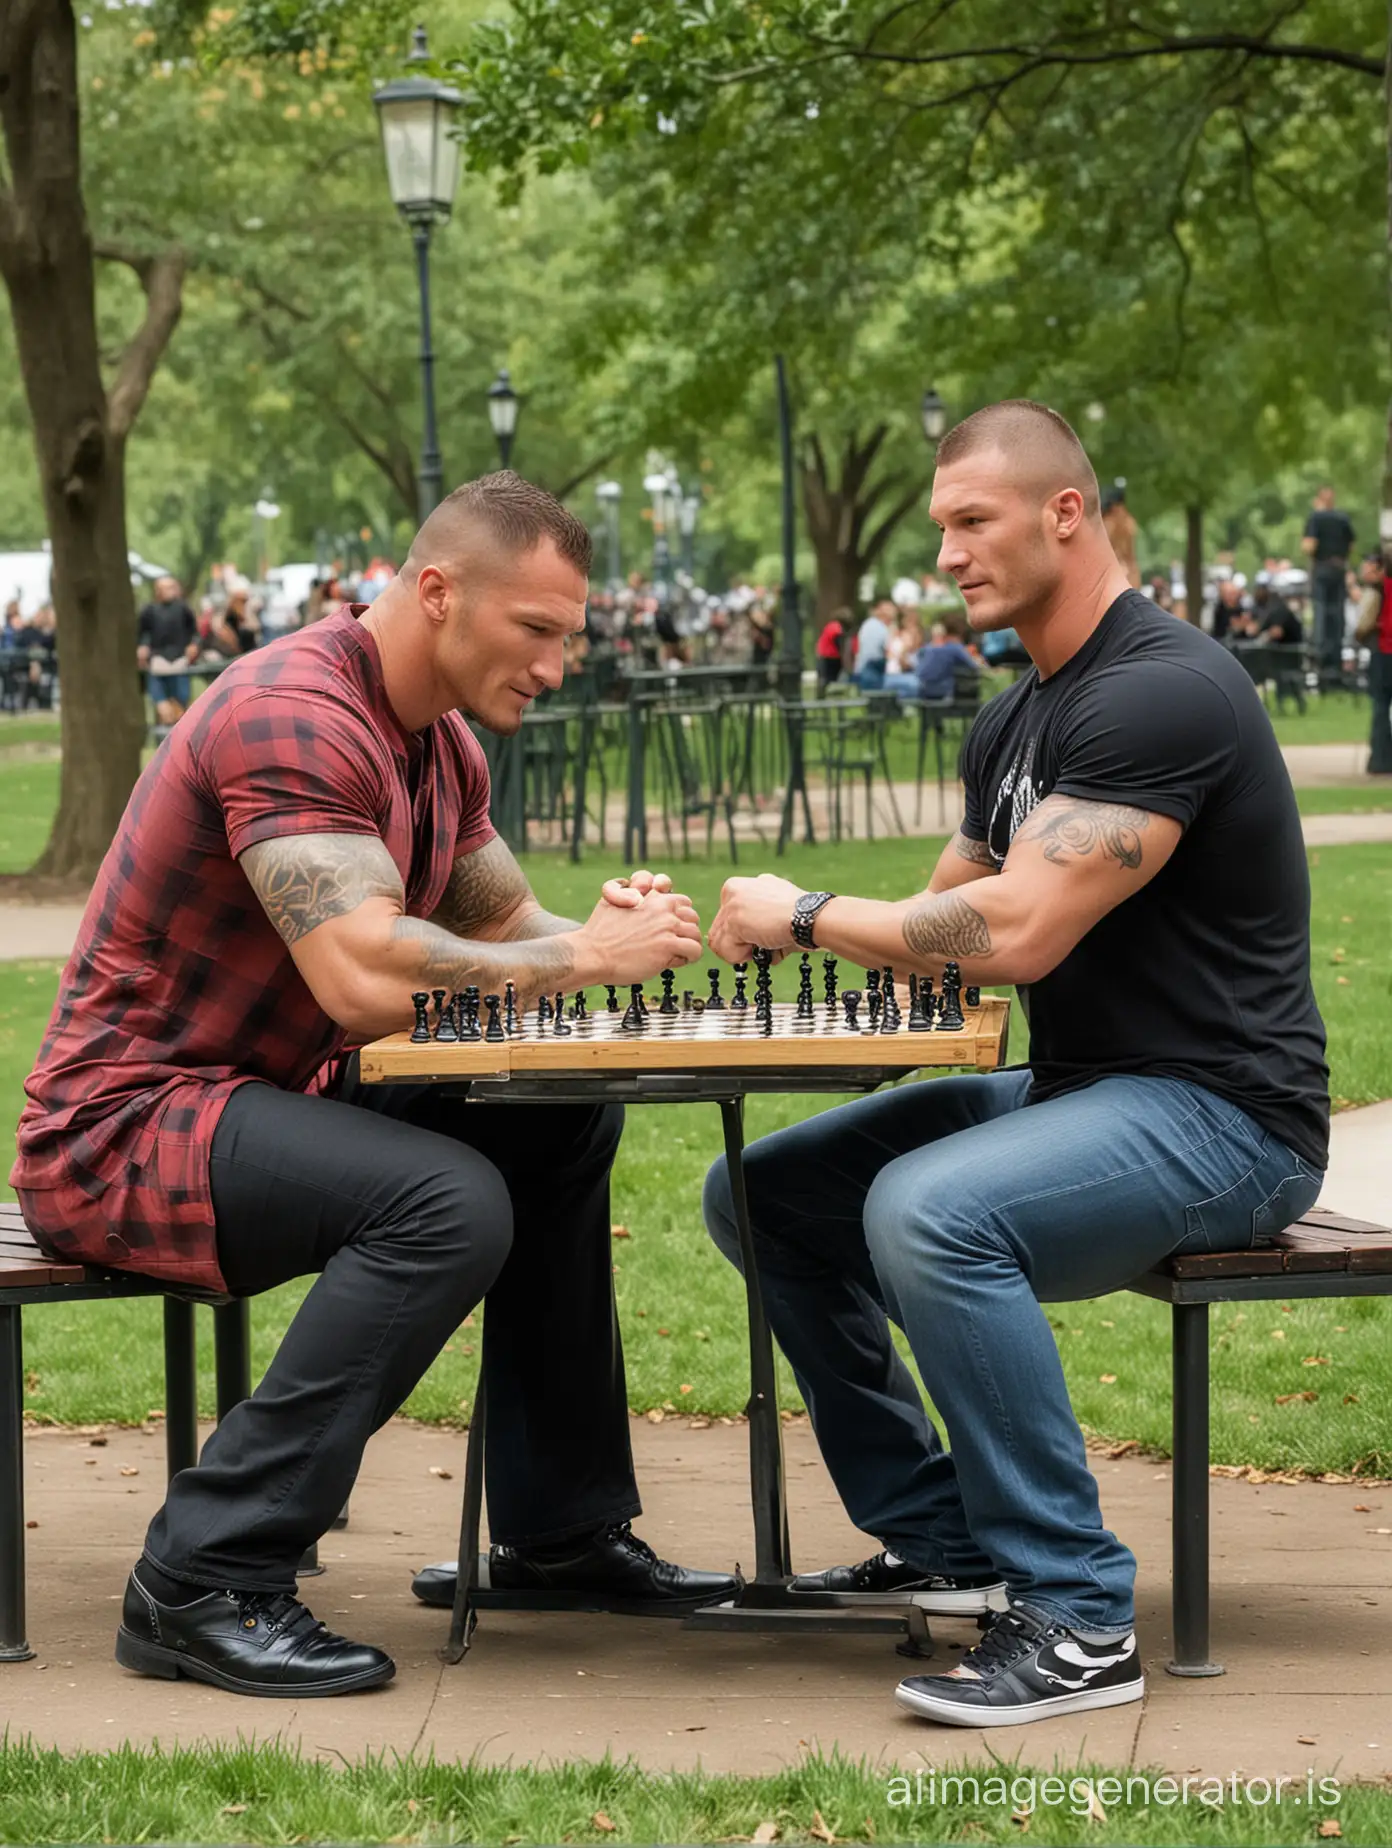 randy orton and edge playing chess in the park